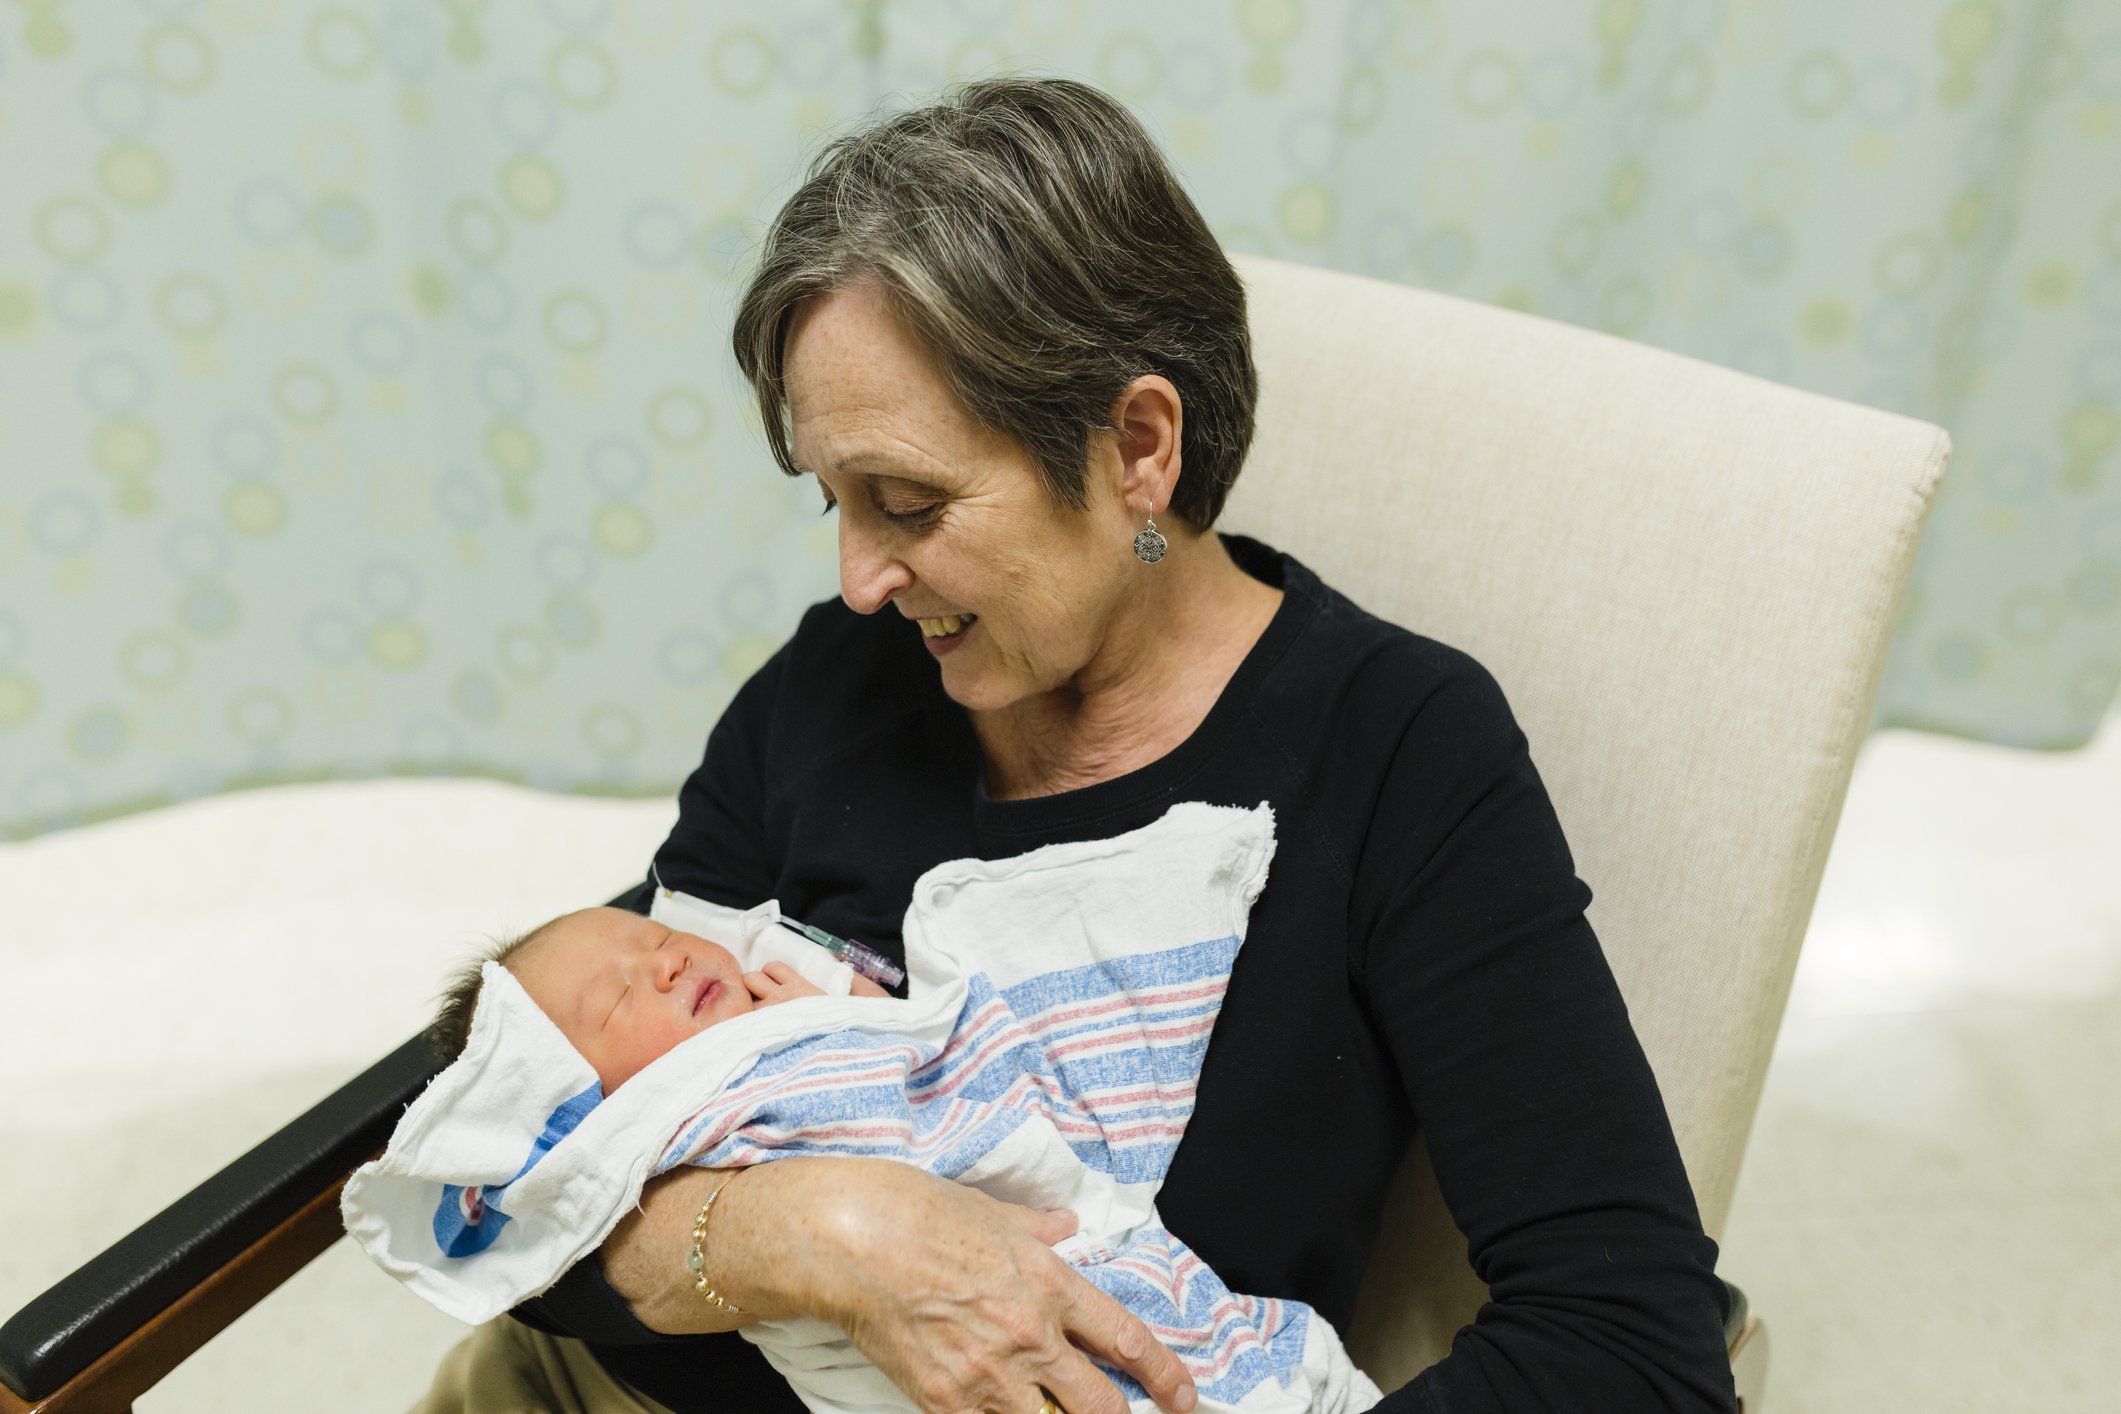 Grandmother looks down smiling at newborn grandchild in the hospital room. | Photo: Getty Images